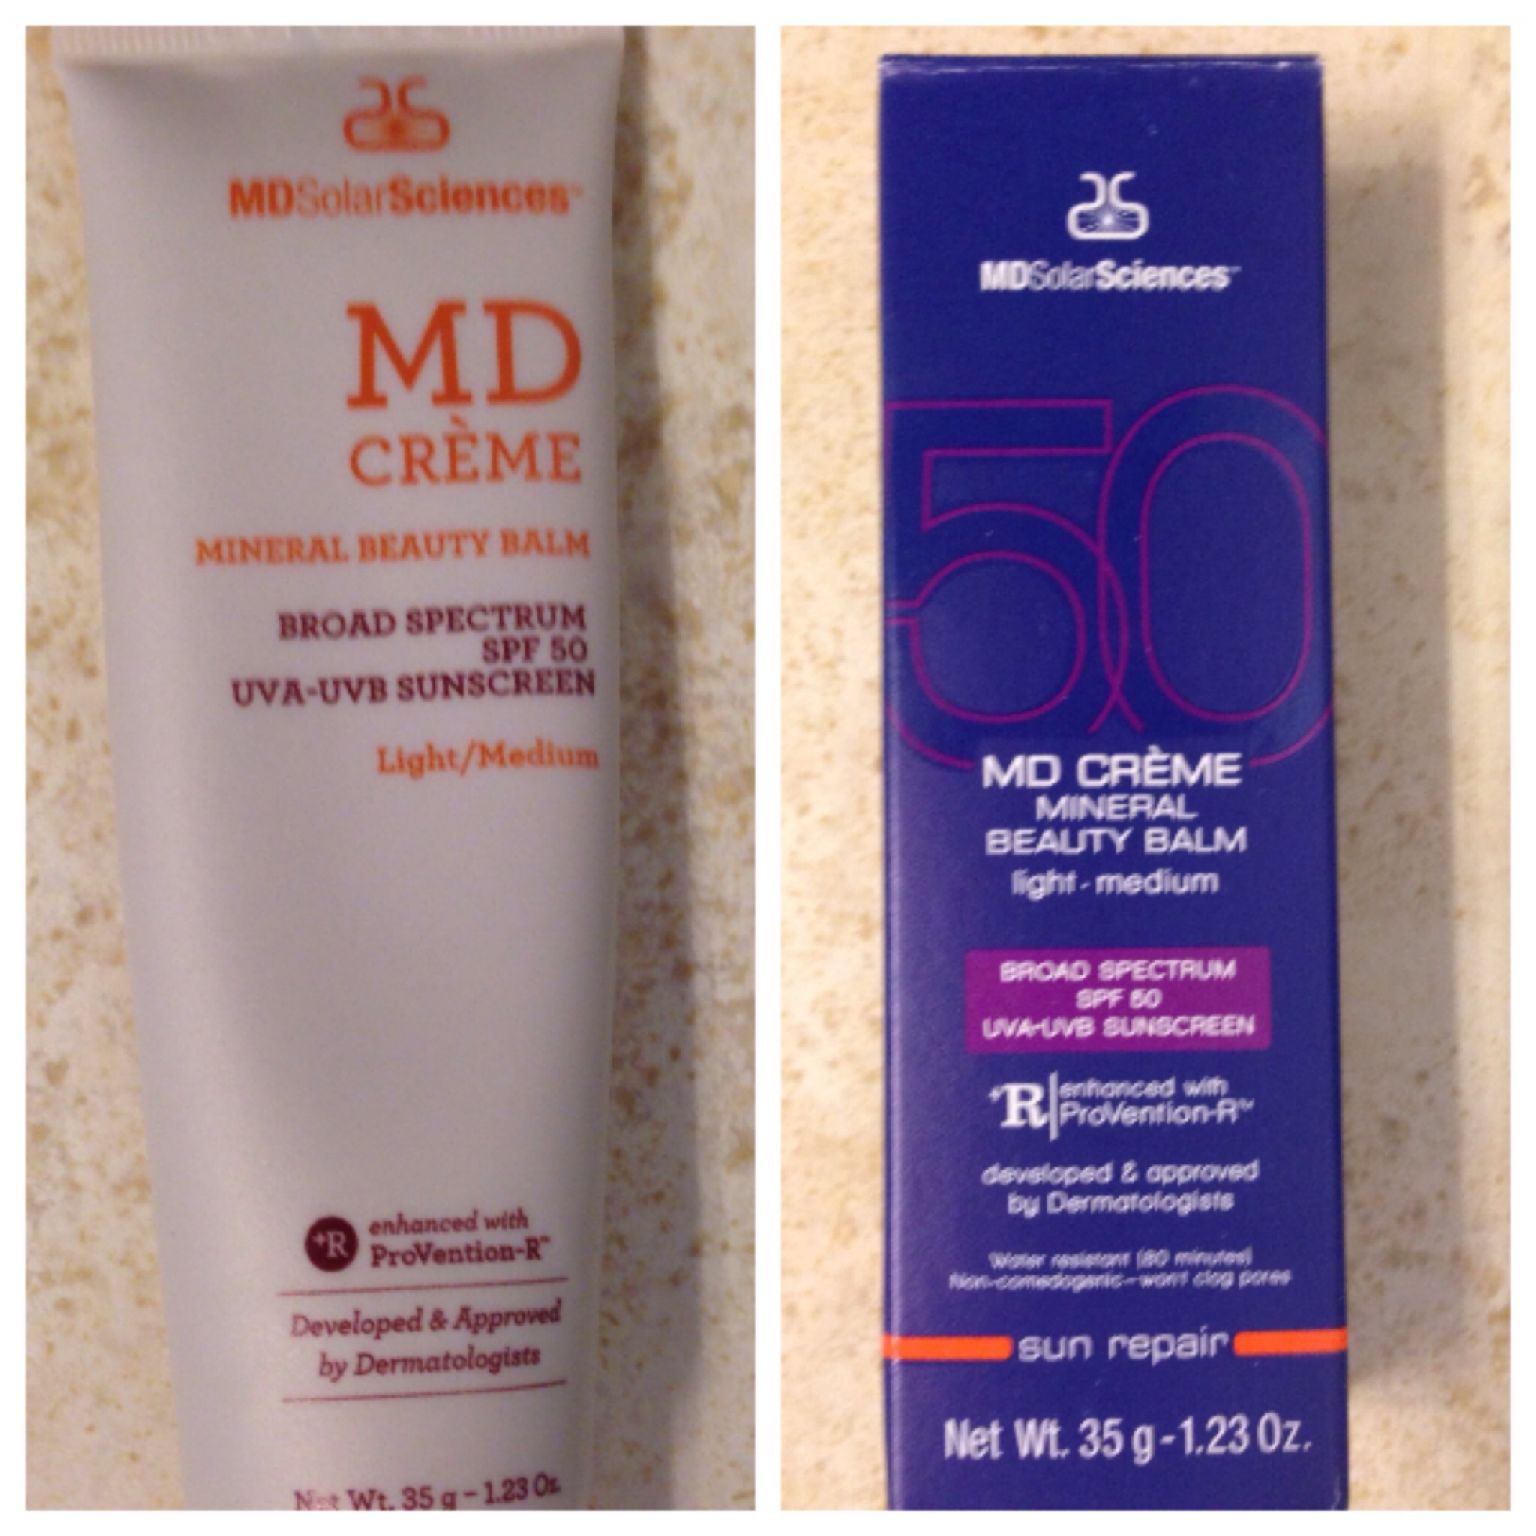 MD Solar Sciences: MD Creme Mineral Beauty Balm Broad ...